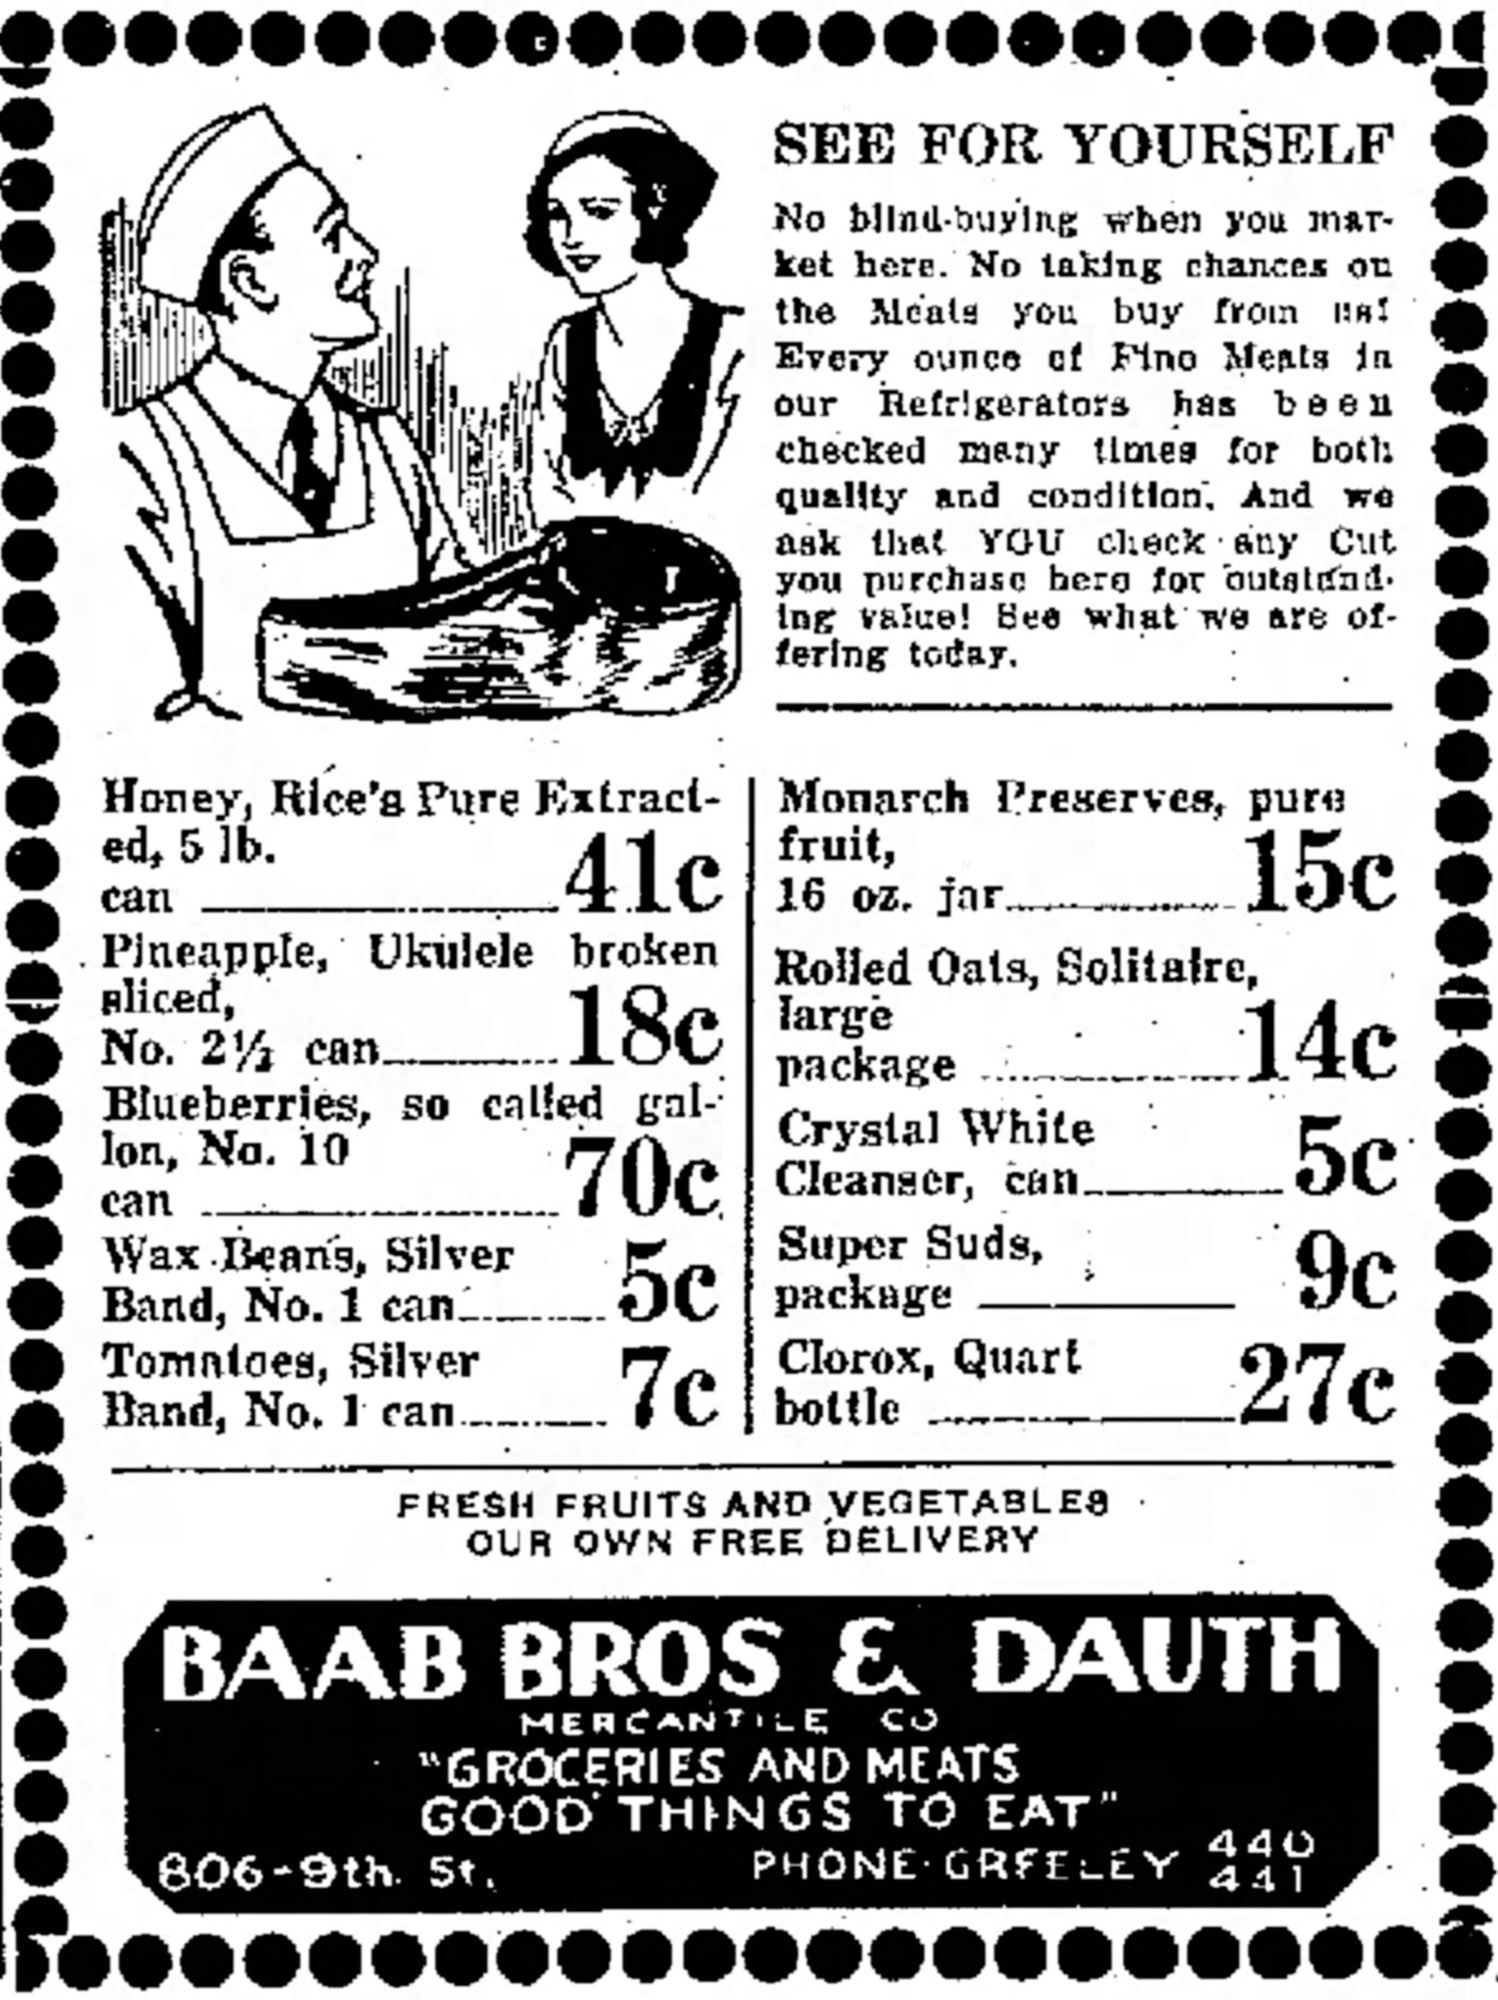 Dauth Family Archive - 1933-05-05 - Greeley Daily Tribune - Baab Bros and Dauth Advertisement